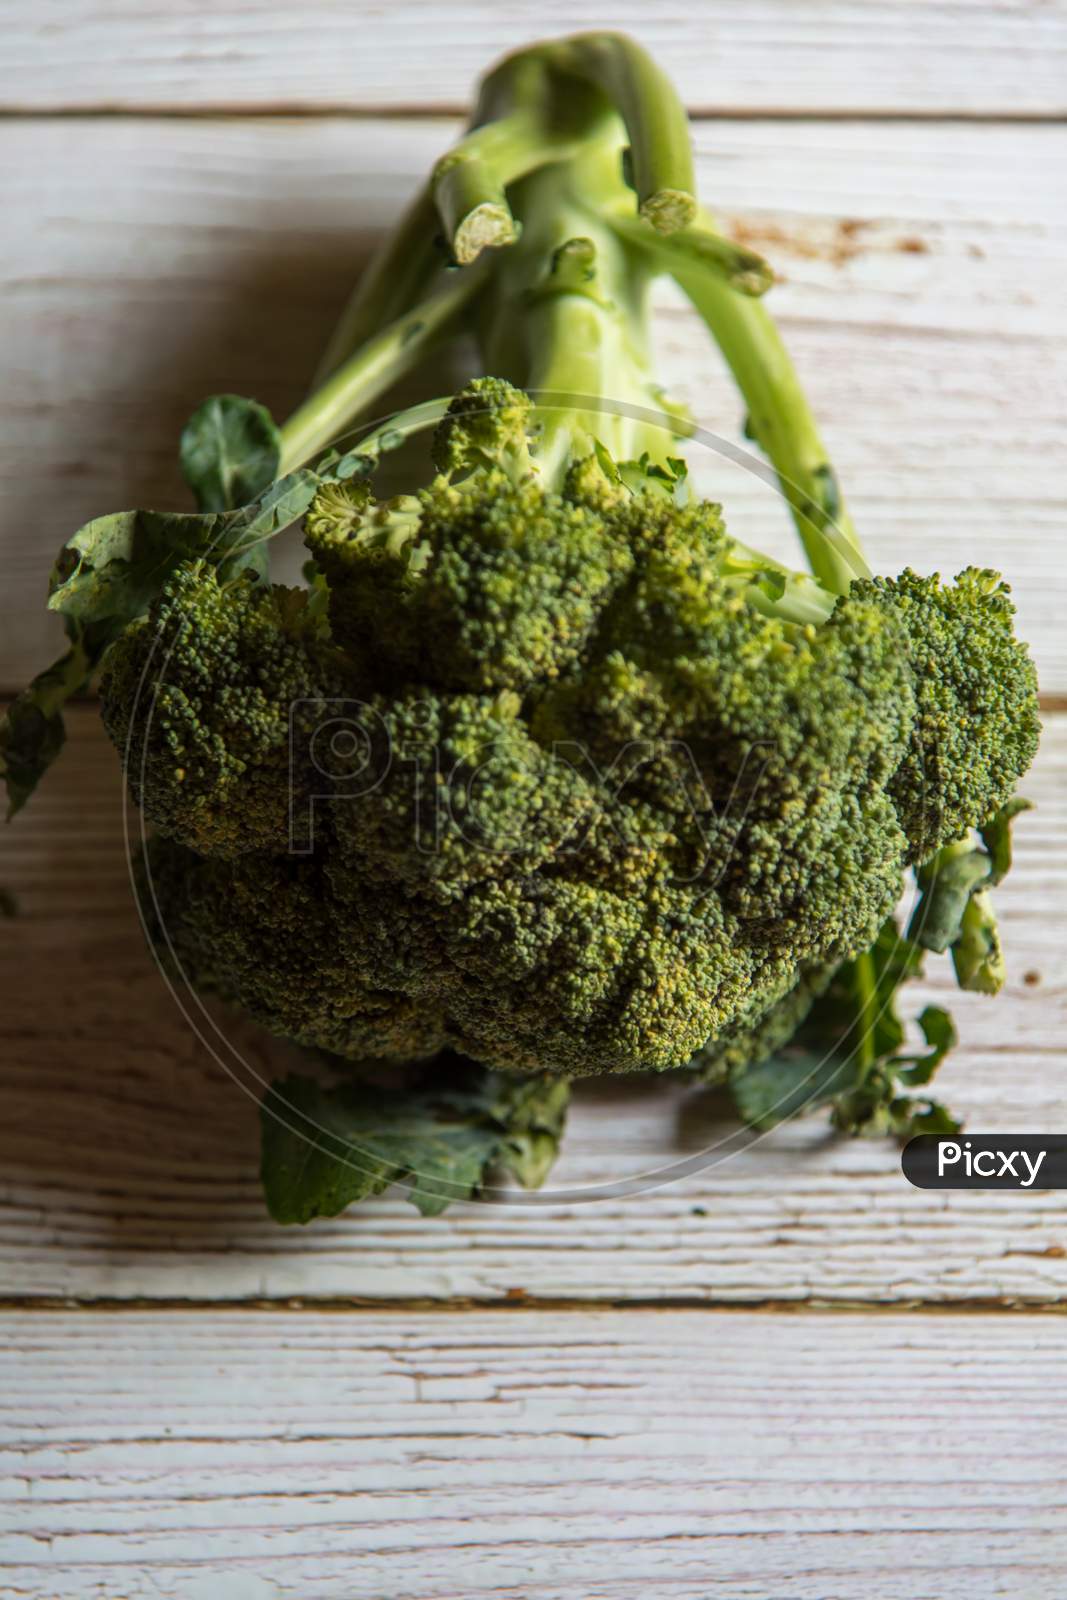 Healthy vegetable raw broccoli on a background